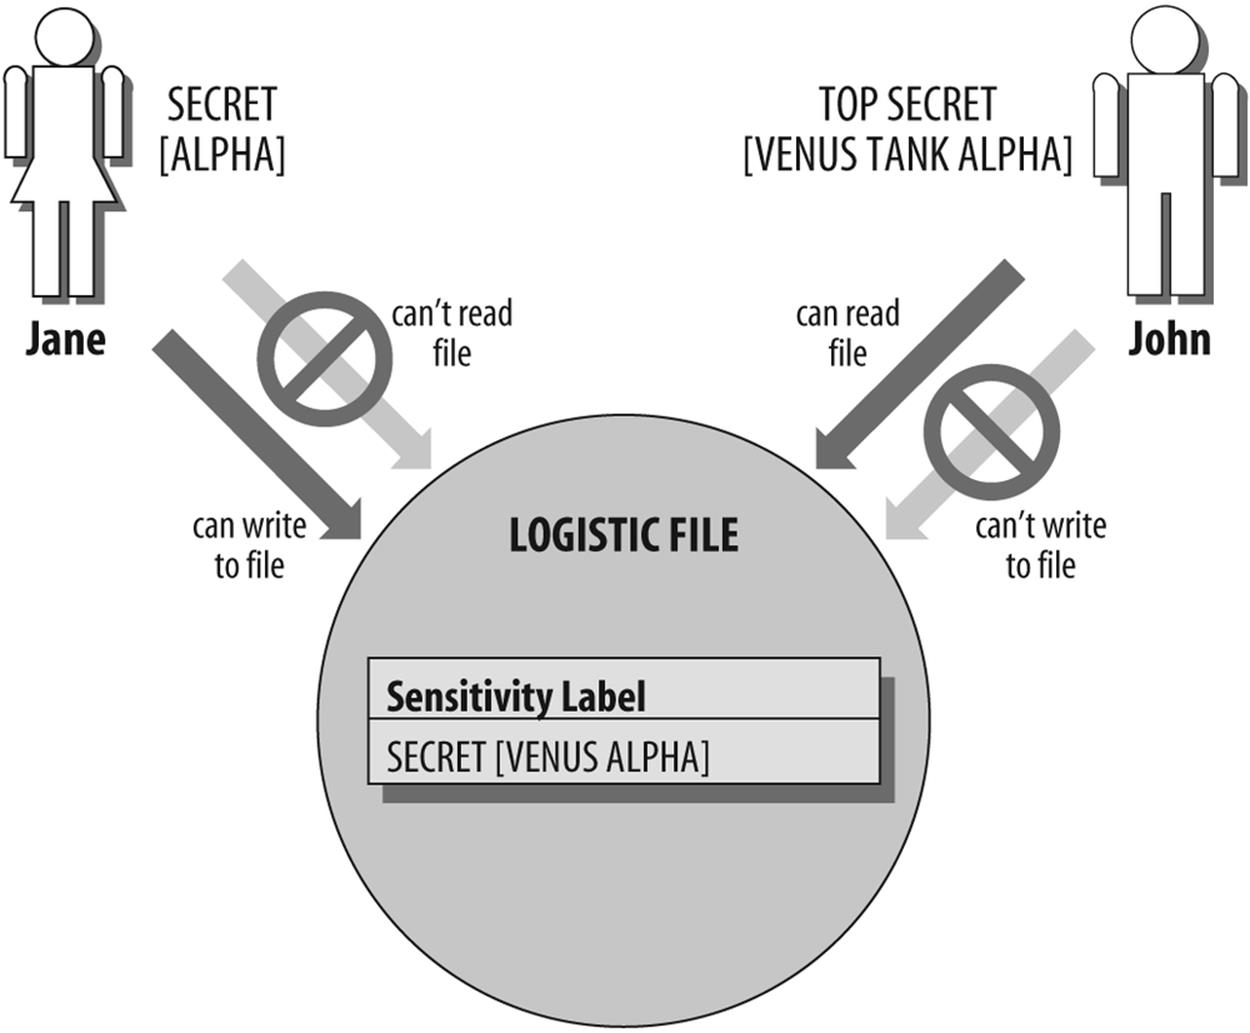 Sensitivity label that consists of two parts